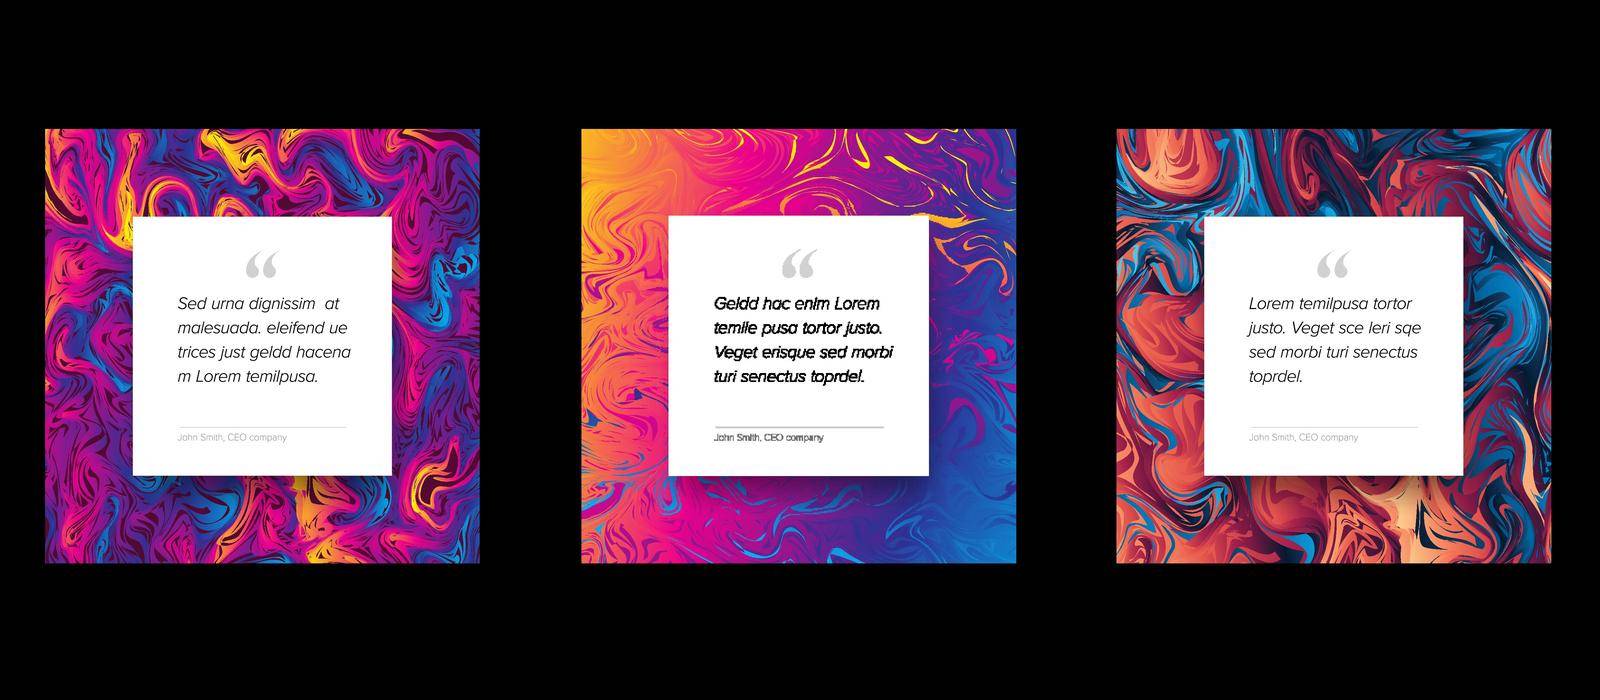 Three Social media design quote layout template. Square qotation presentations with colorful pattern frame and white content placeholder for your text. Minialistic designed quote motto templates